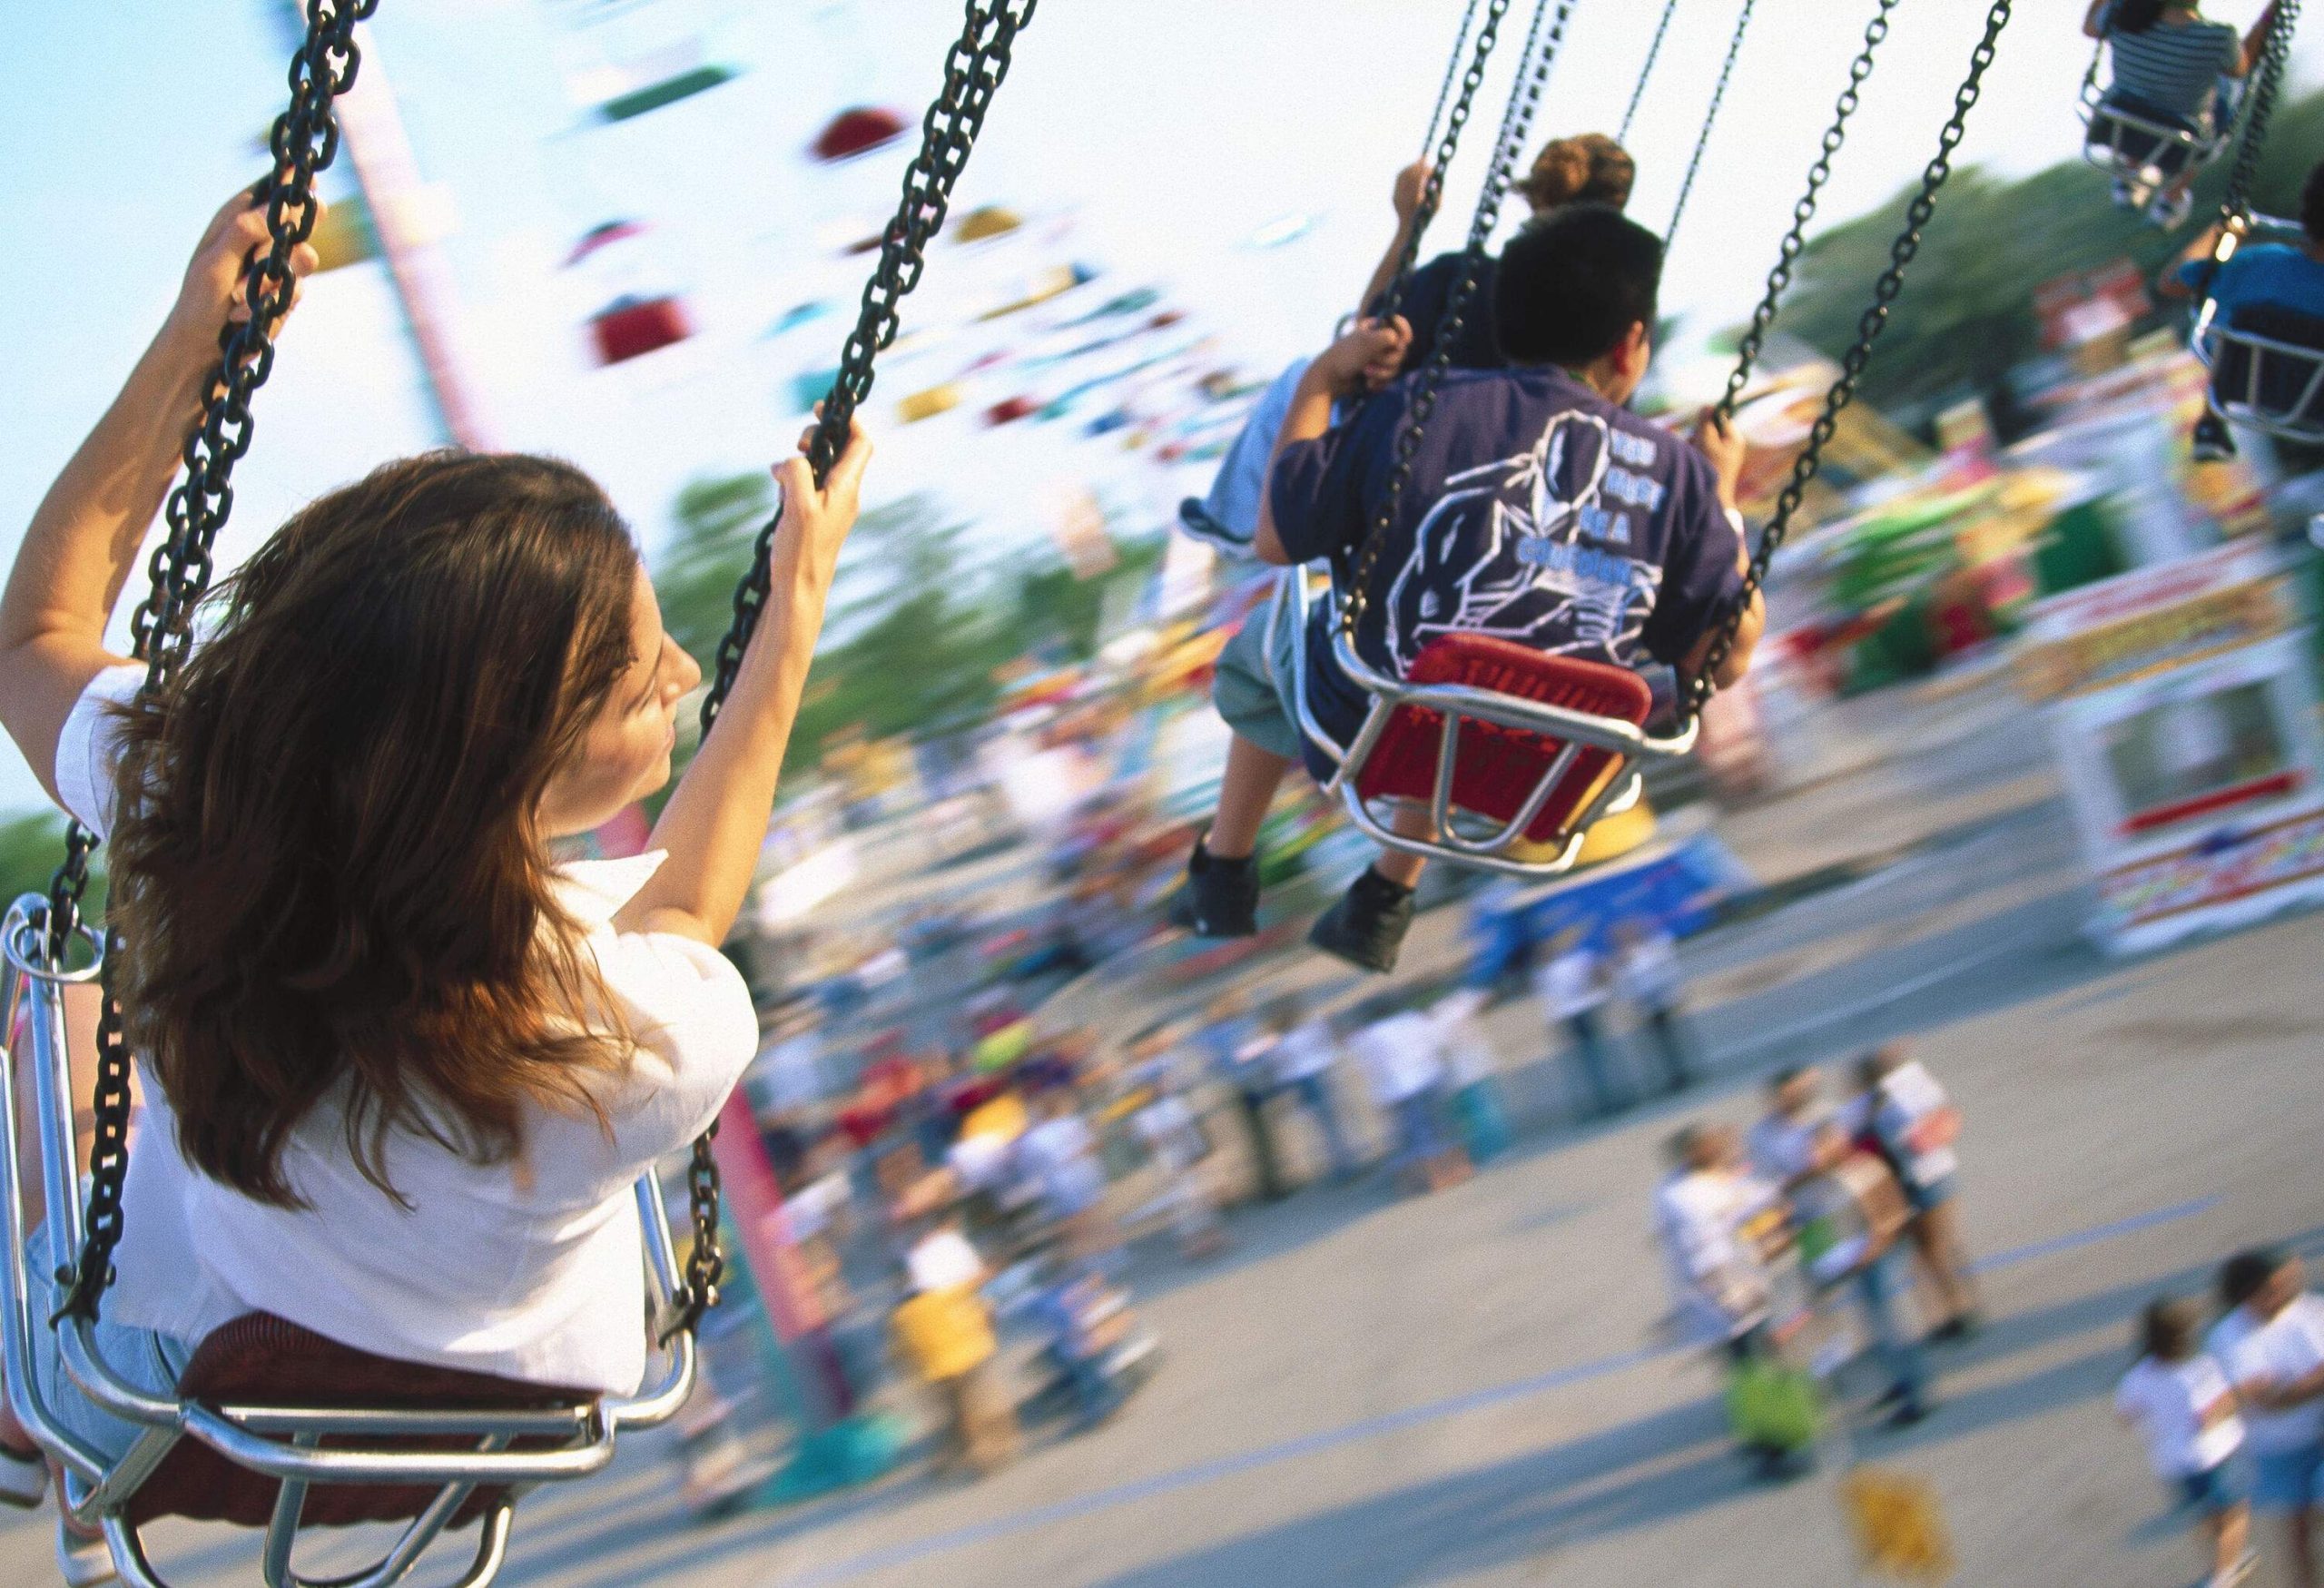 Children and adults riding a swing carousel at an amusement park.